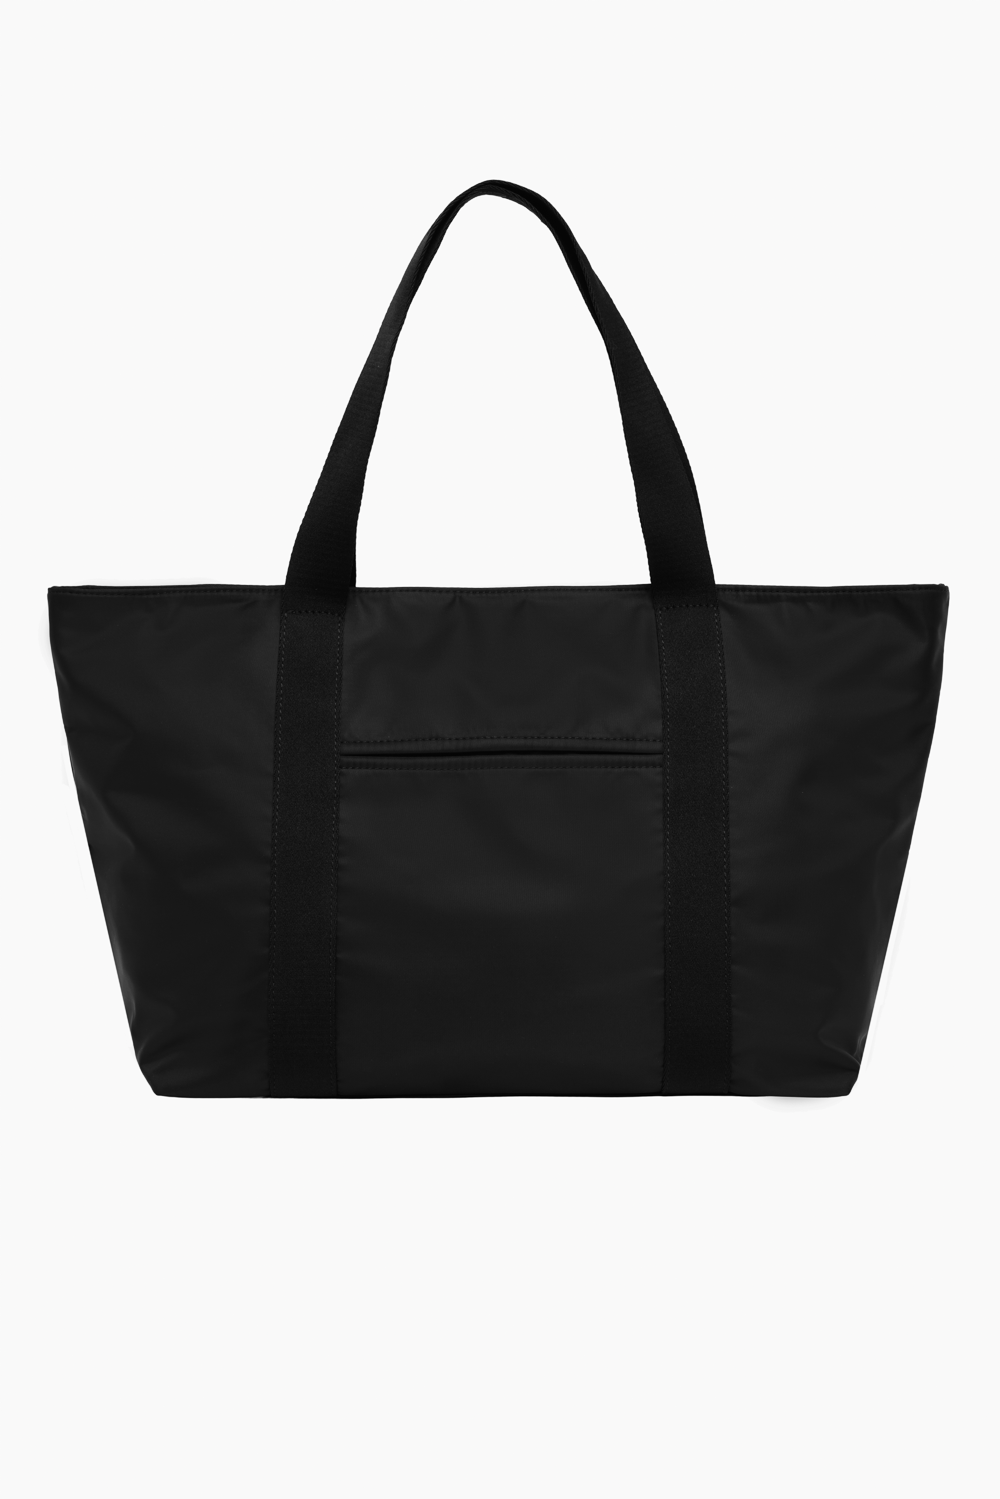 EVERYWHERE TOTE - ONYX Featured Image